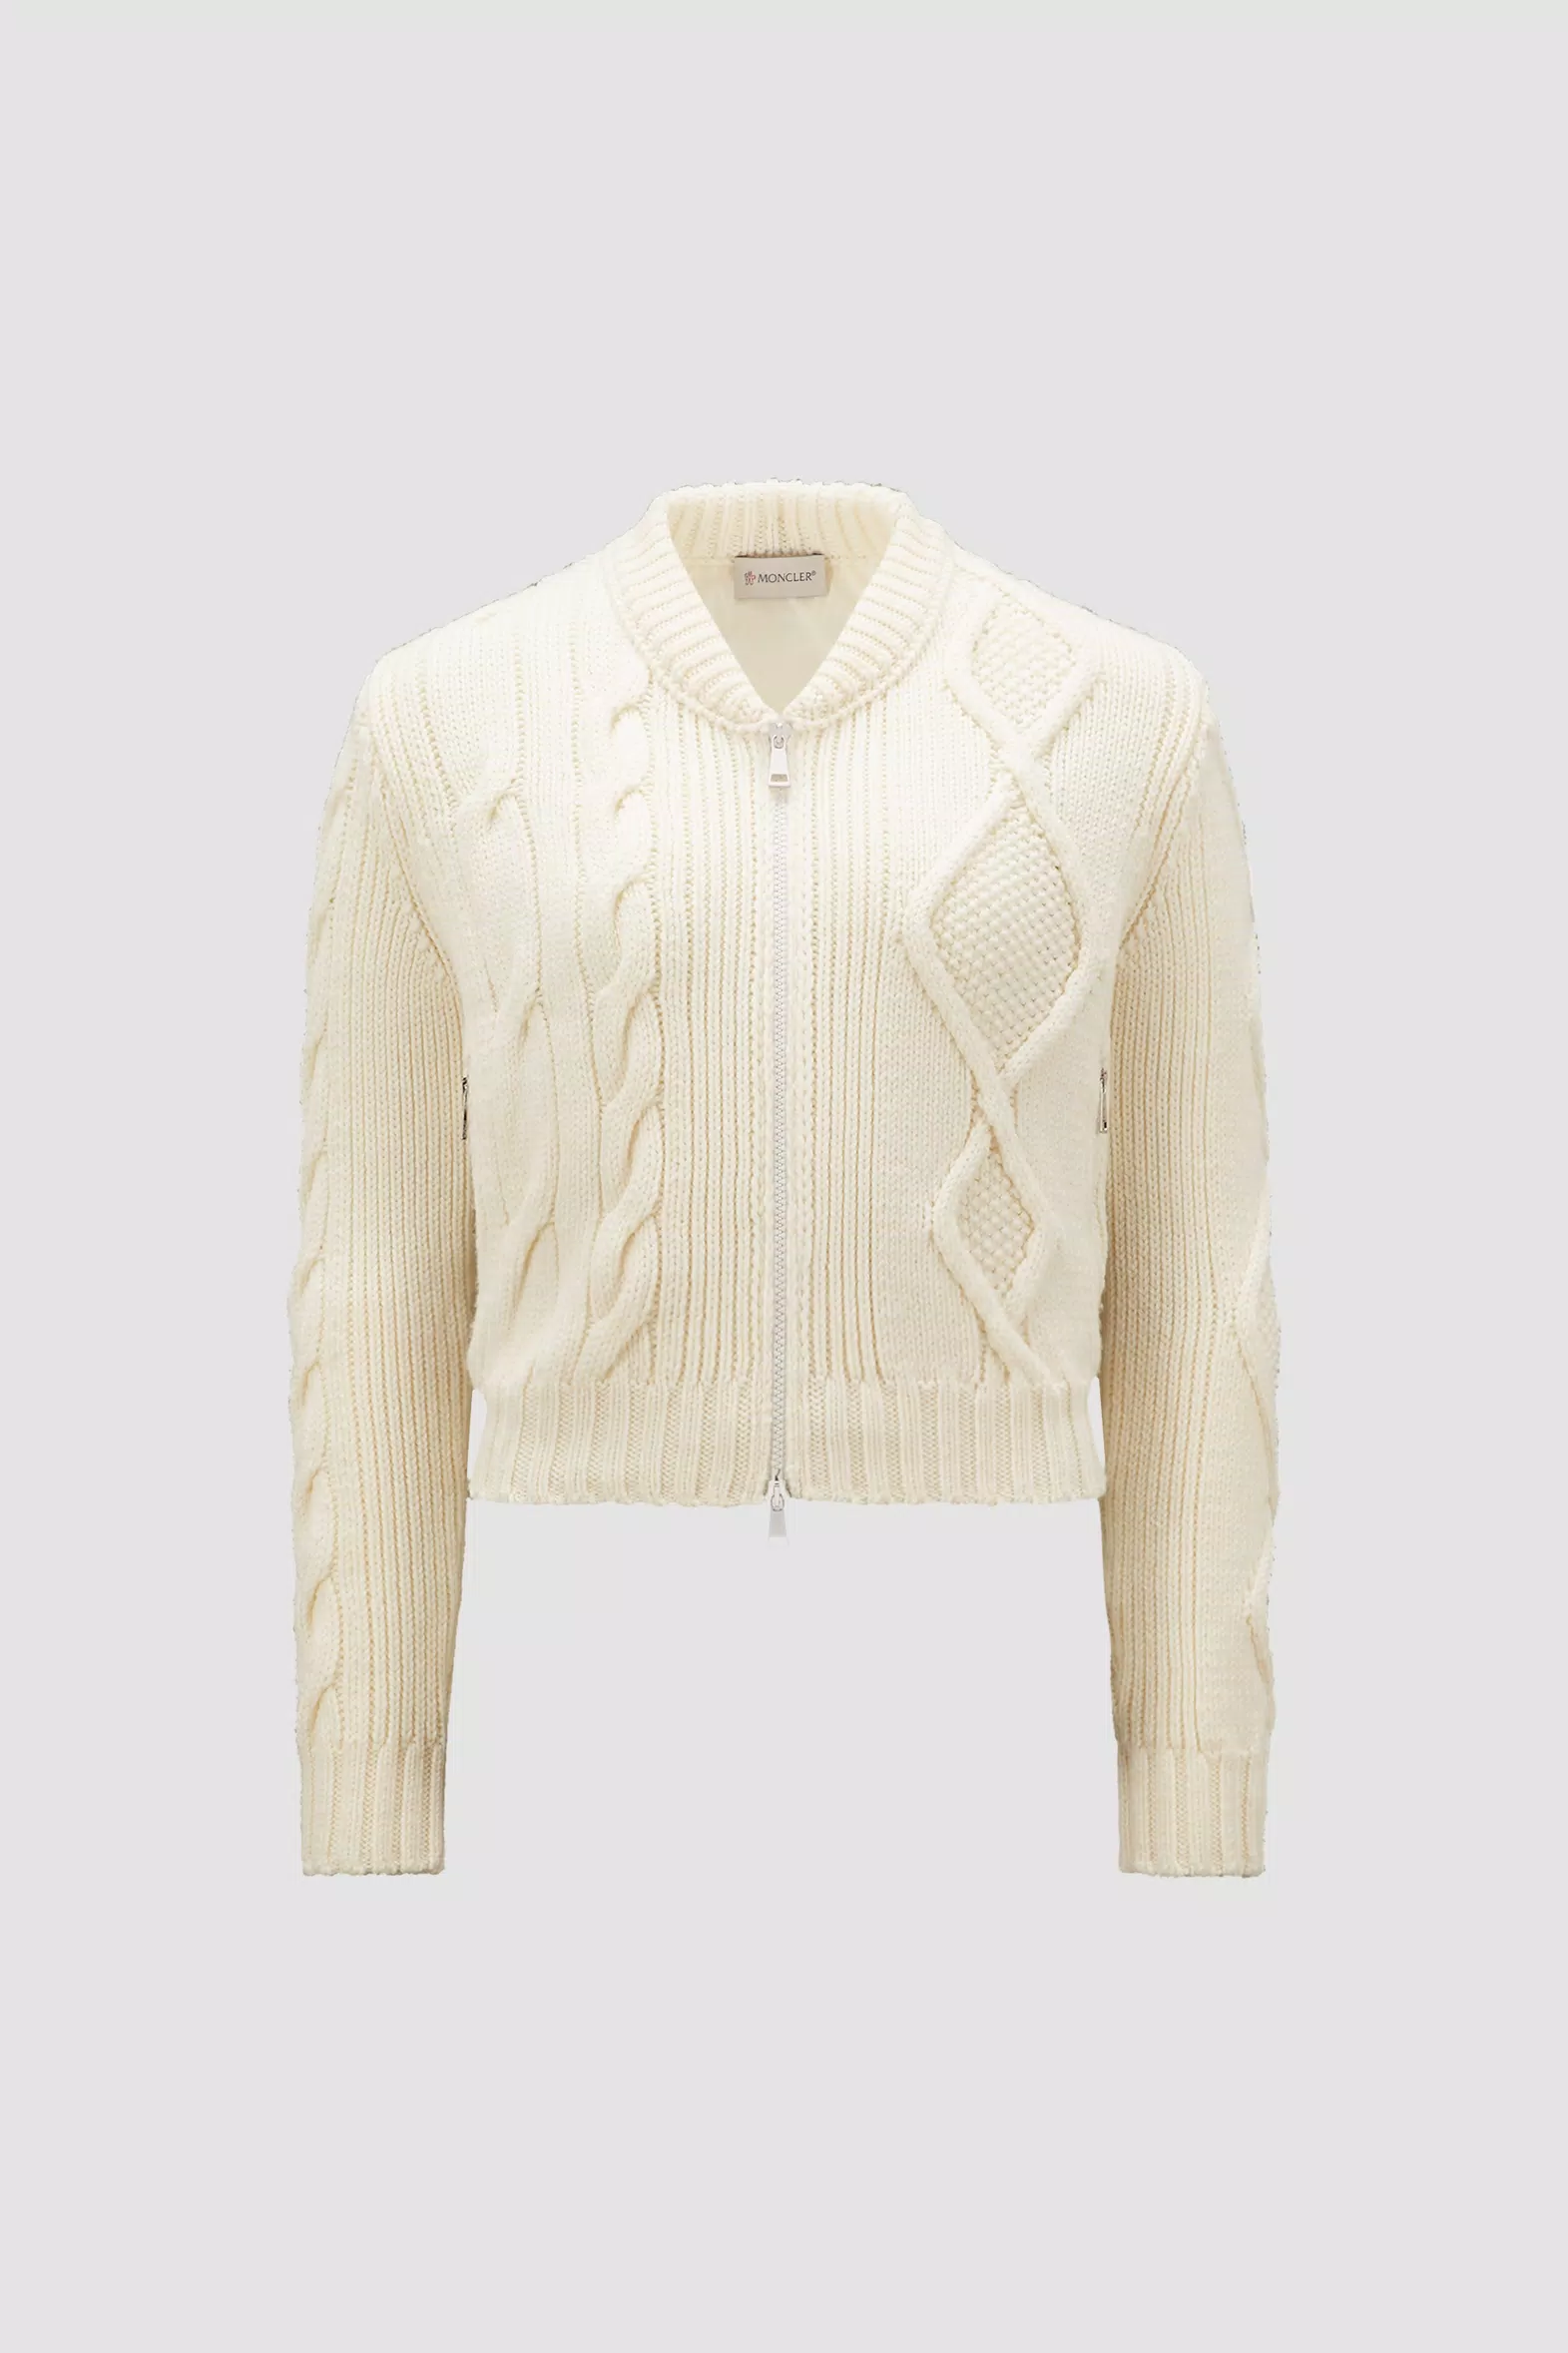 White Padded Wool Zip-Up Cardigan - Sweaters & Cardigans for Women ...